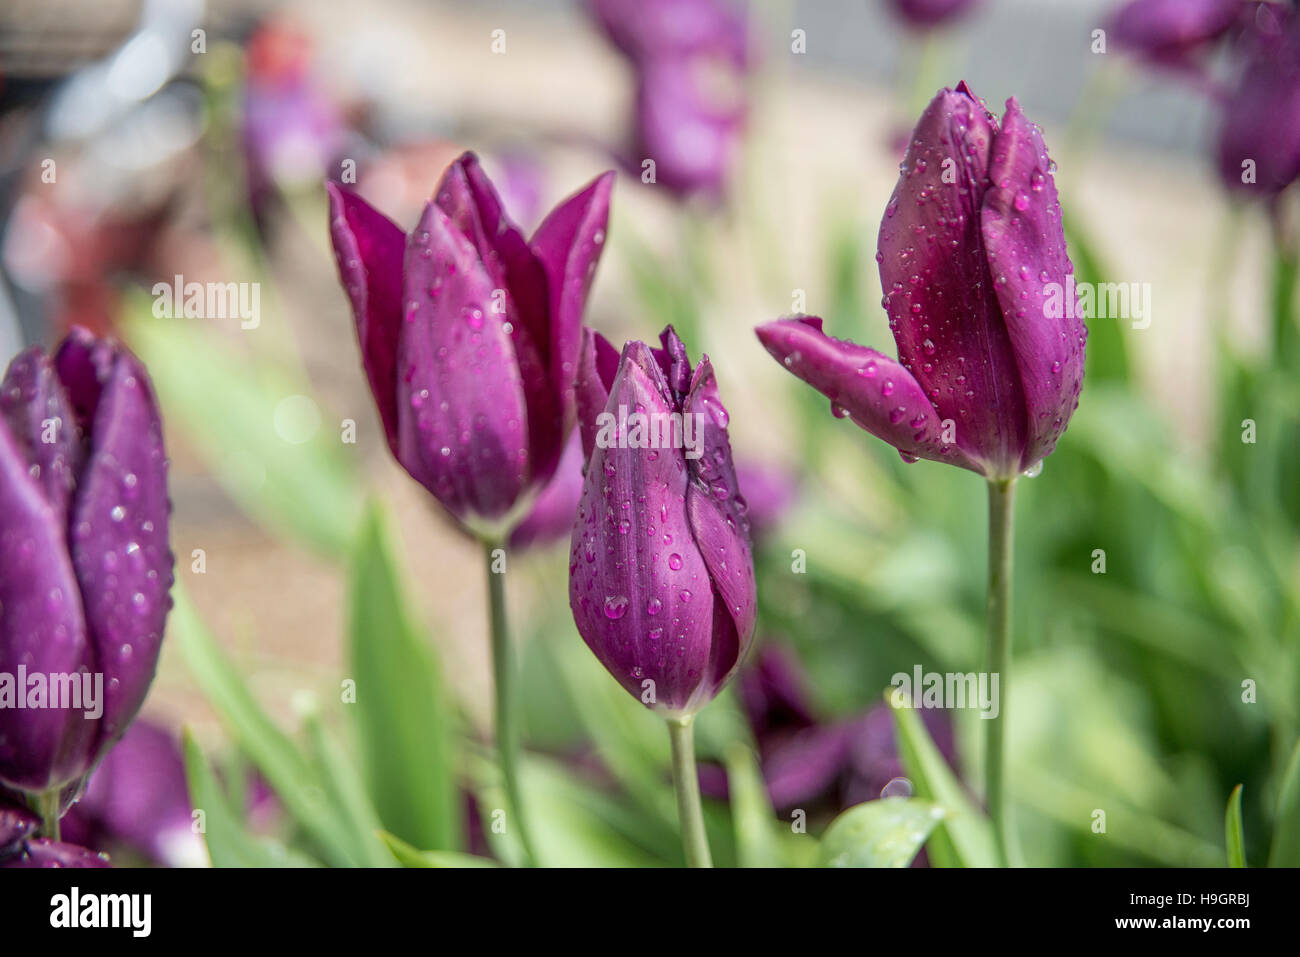 Dark dutch violet tulips with drops of morning dew on a blurred background. Stock Photo